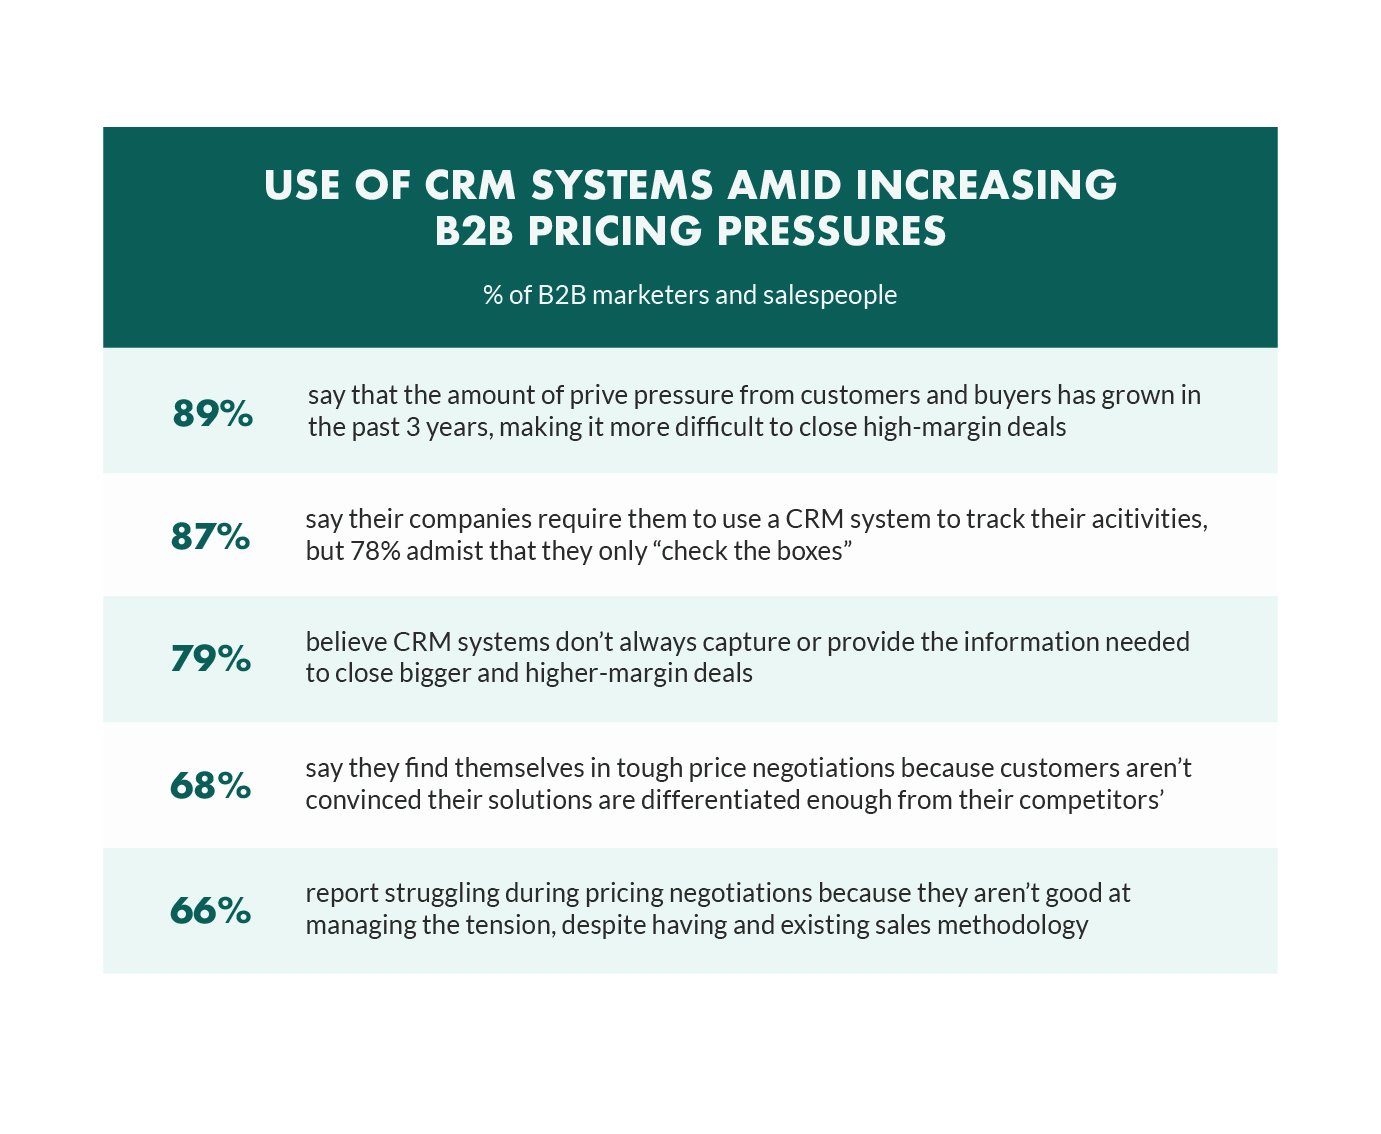 use associated with CRM amid increasing B2B pricing pressures